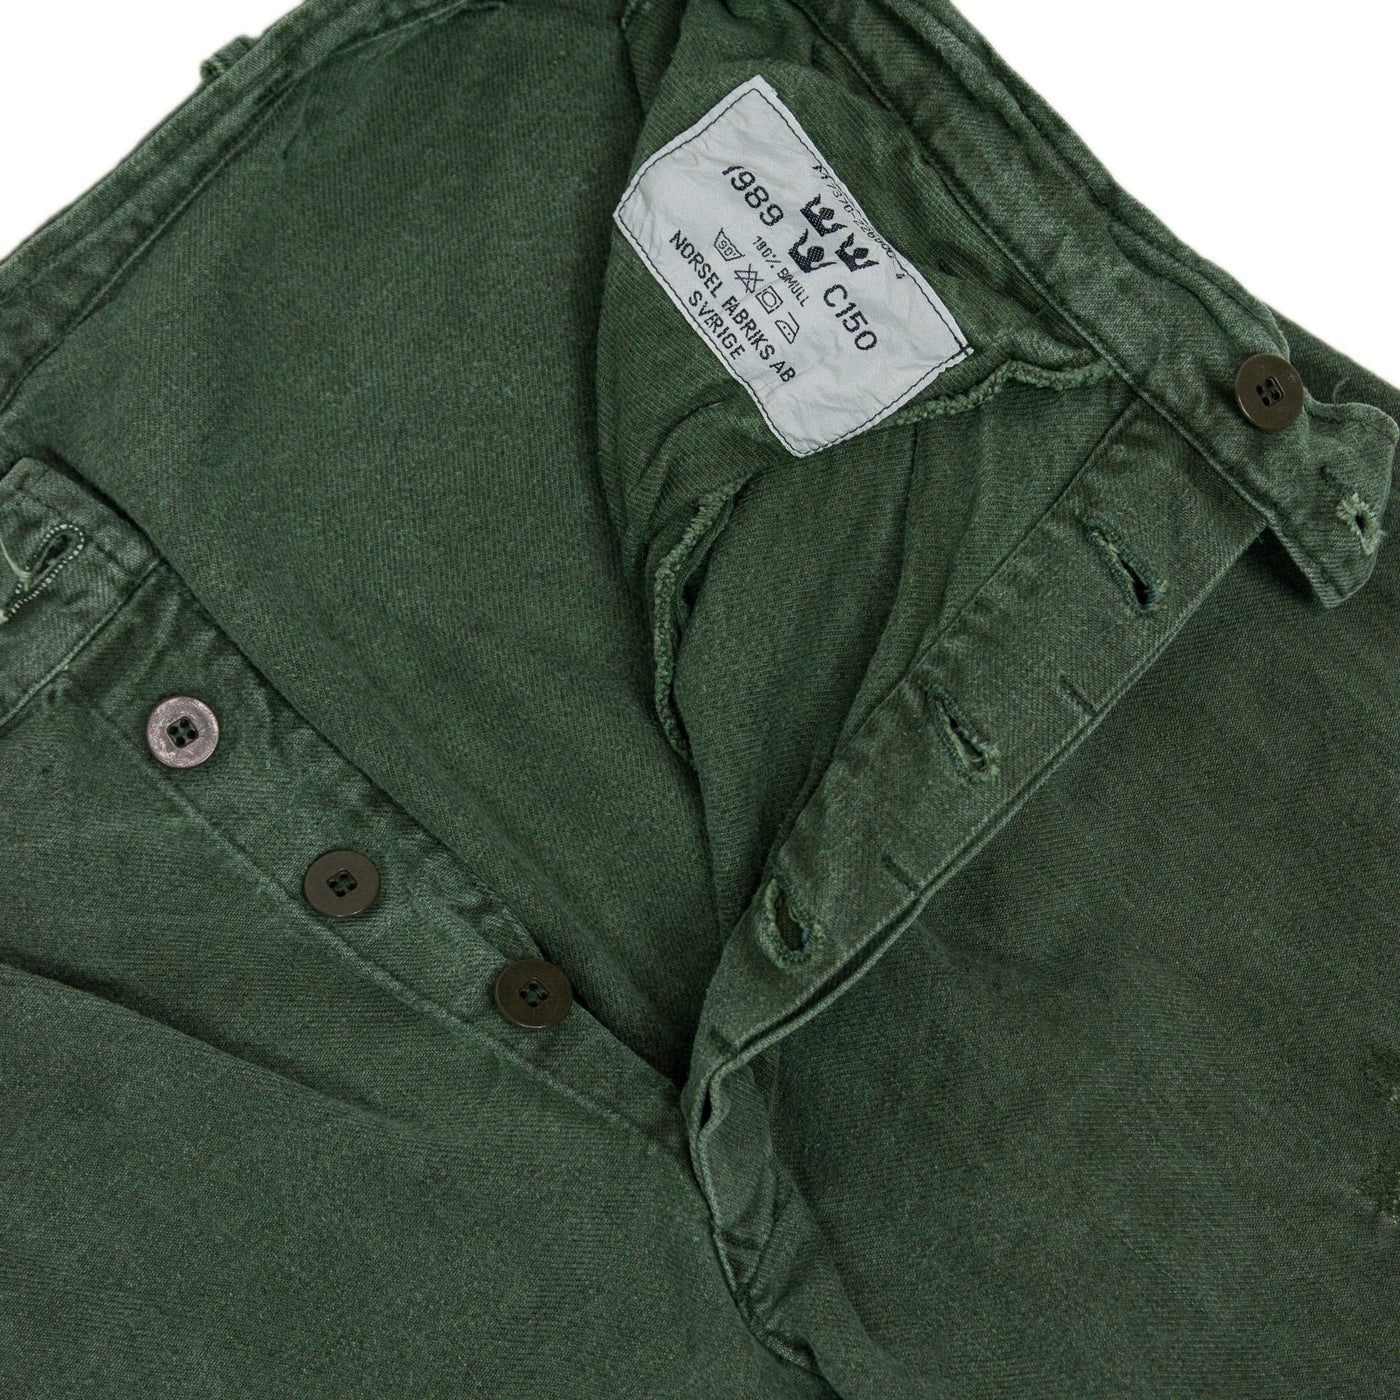 Vintage 70s Distressed Swedish Military Field Trousers Worker Style Green 30 W button